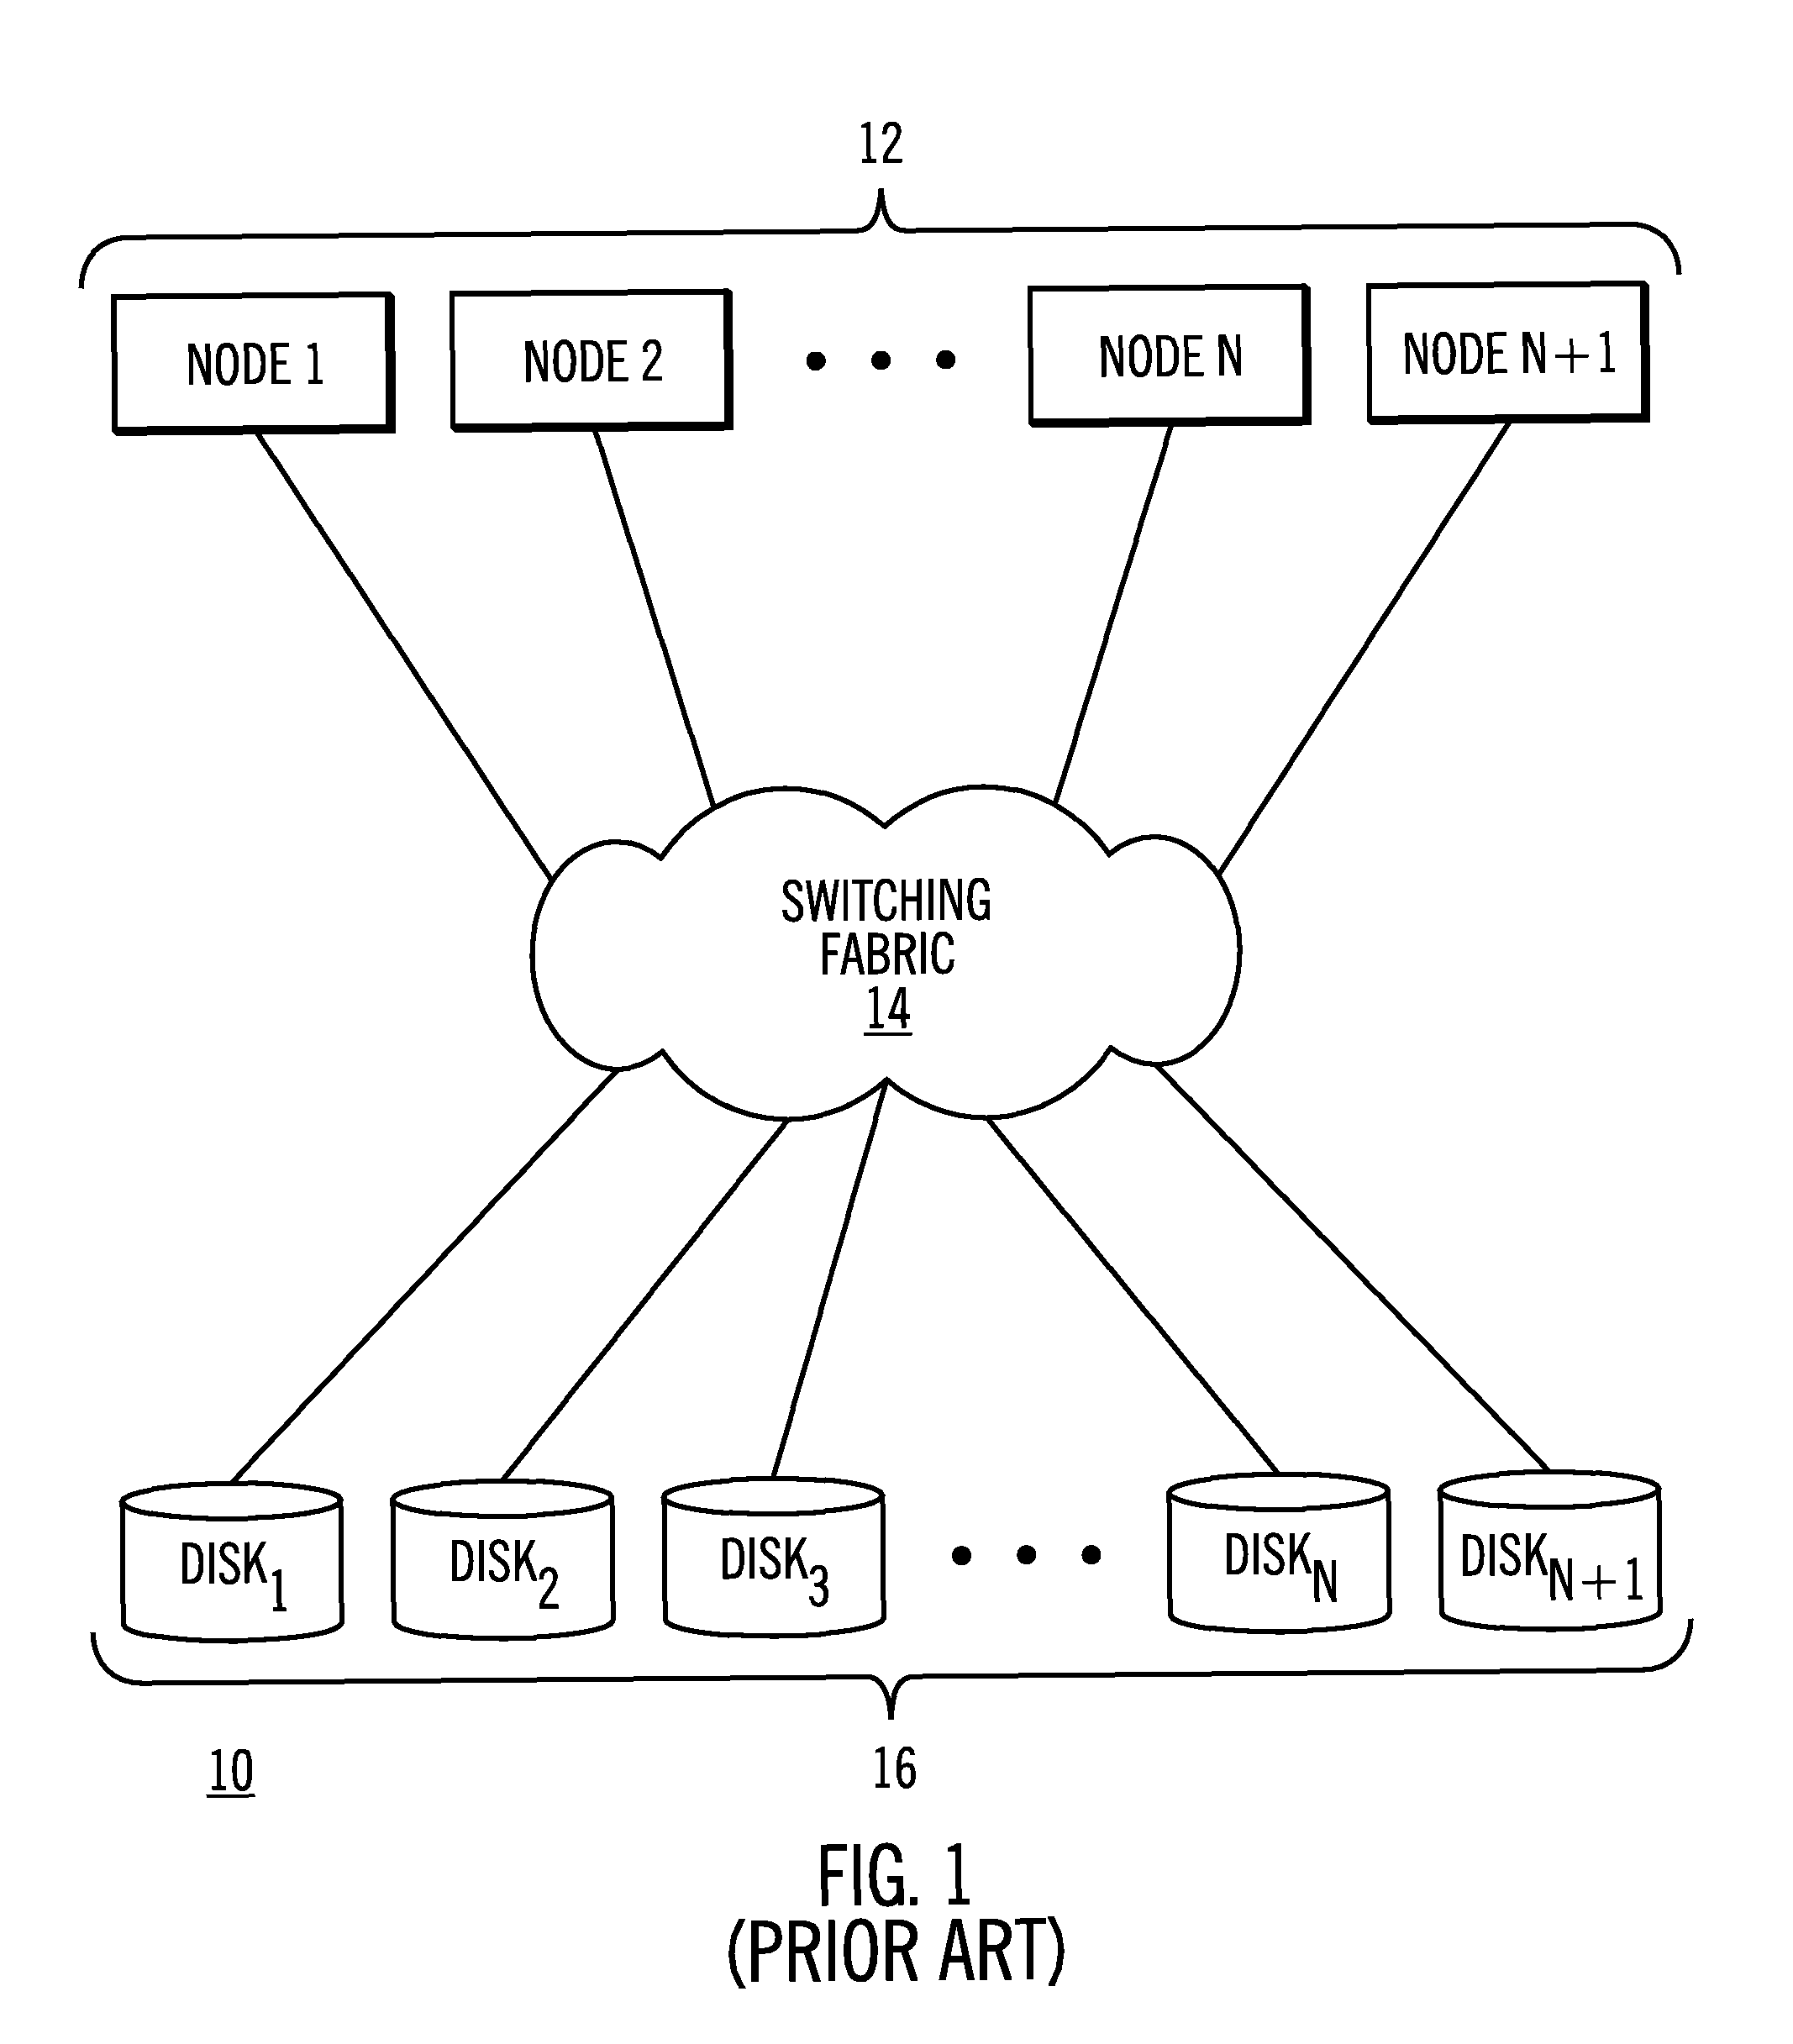 File system mounting in a clustered file system